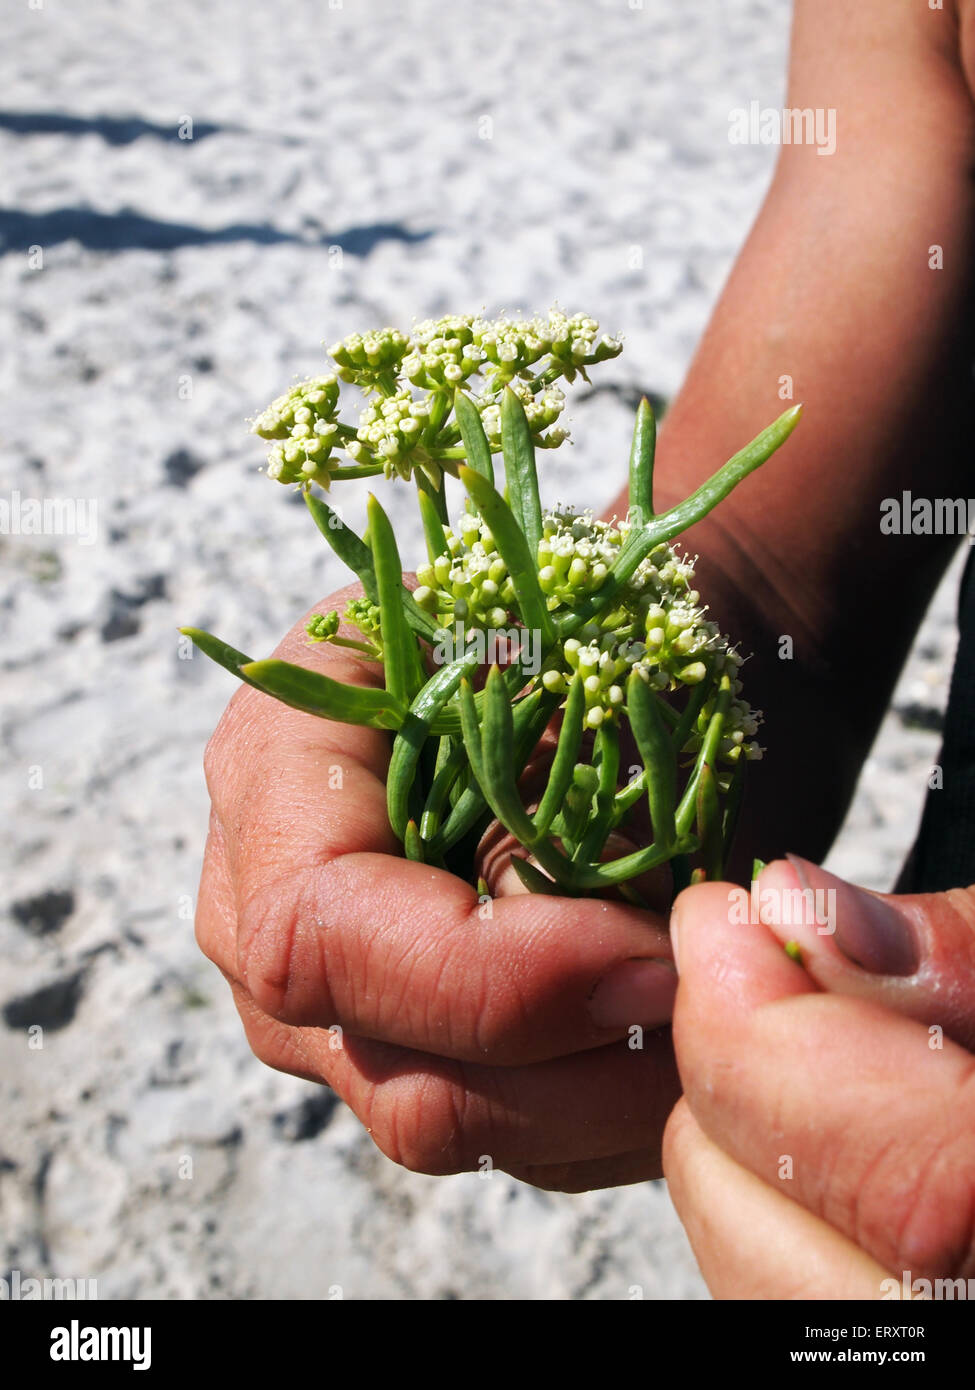 sea vegetable in hand Stock Photo